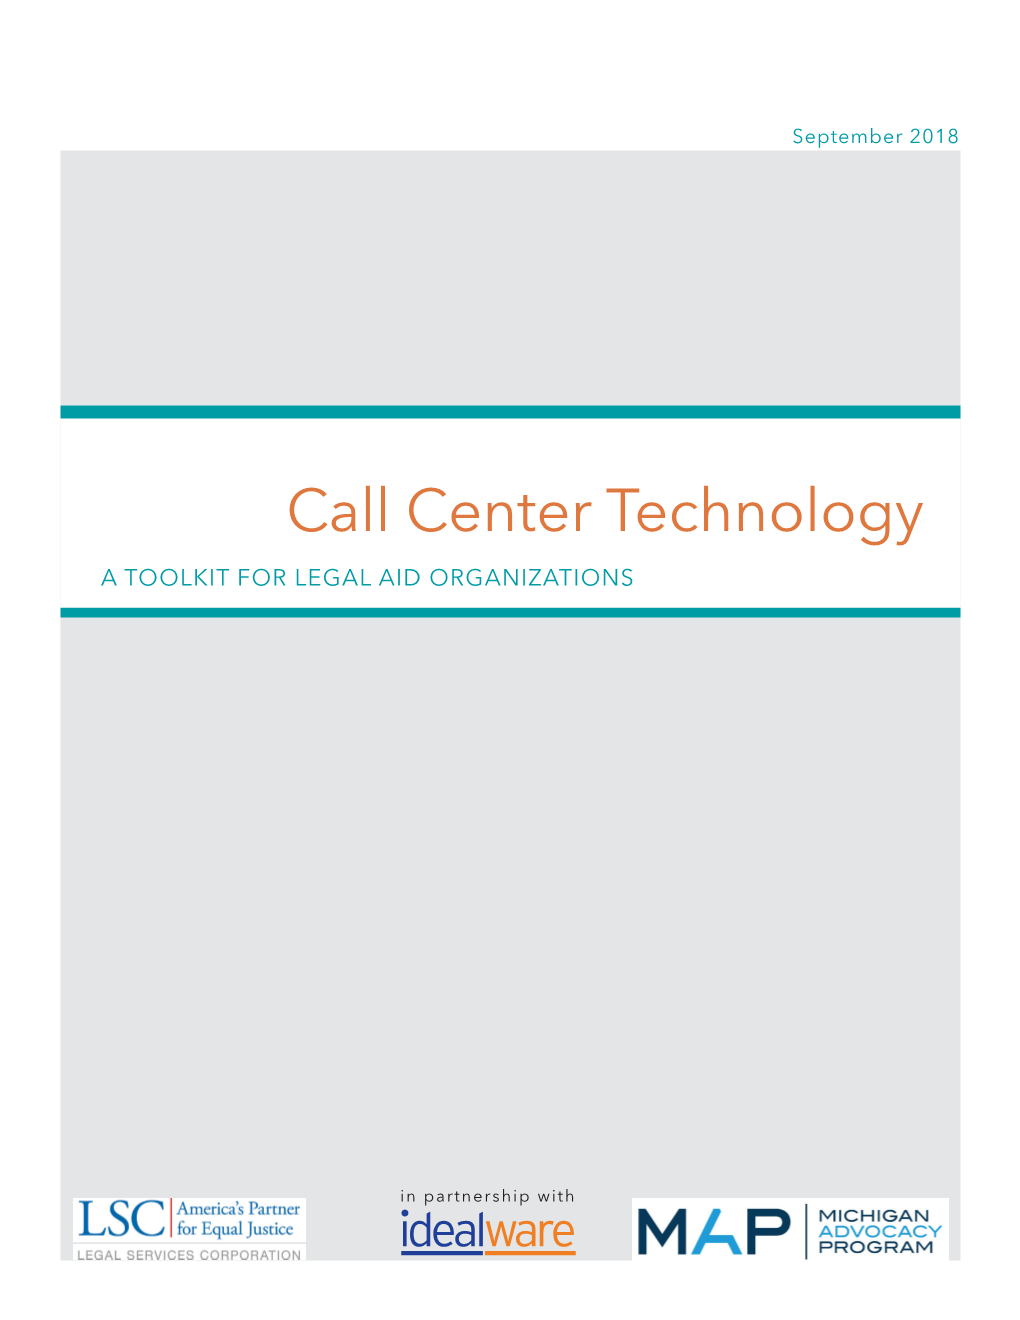 Call Center Technology a TOOLKIT for LEGAL AID ORGANIZATIONS